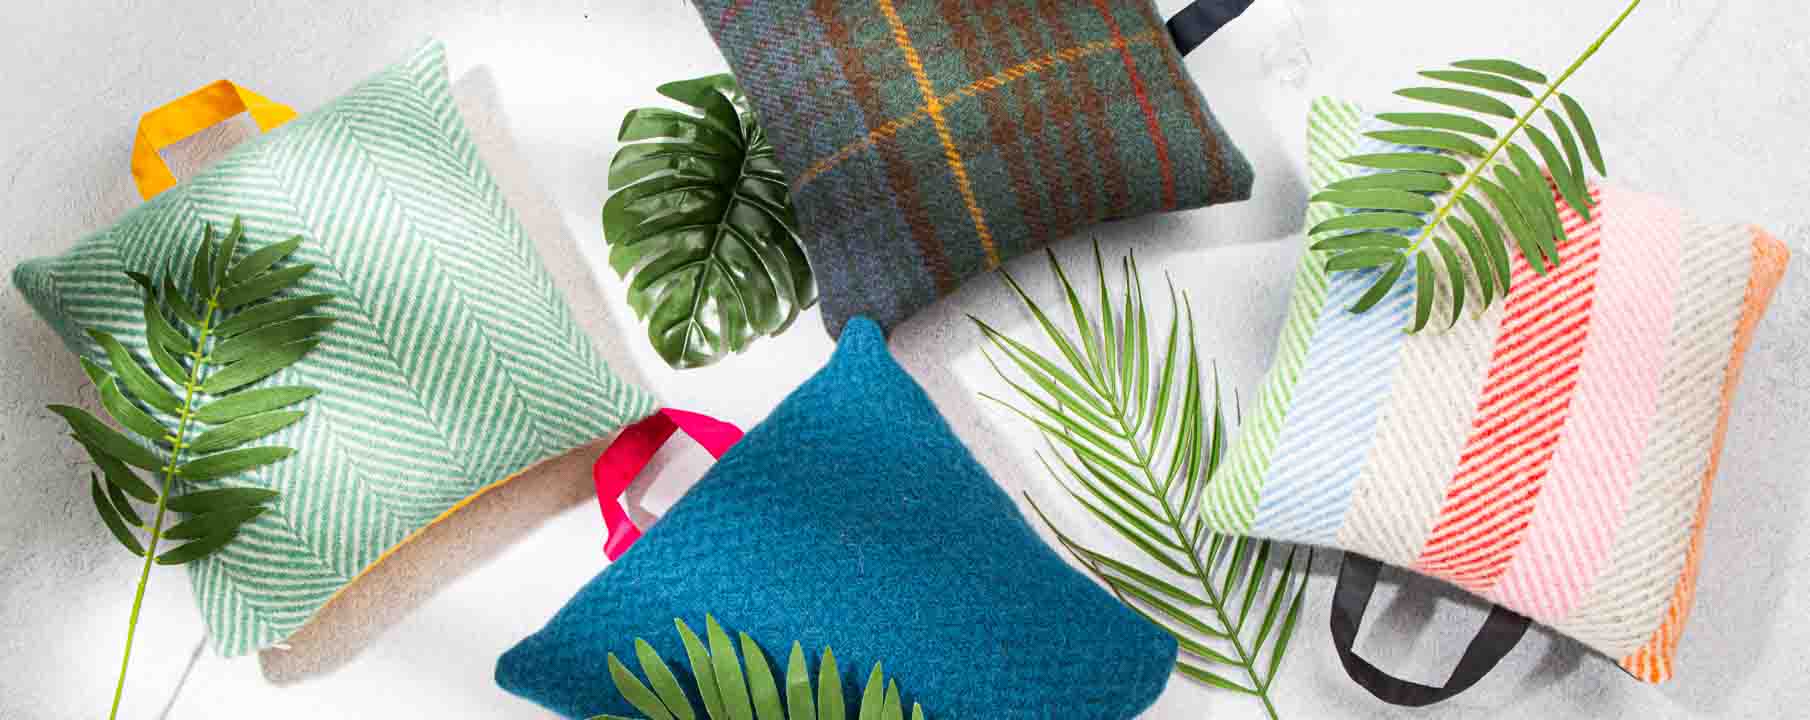 Outdoor Cushions for the Garden and for Picnics